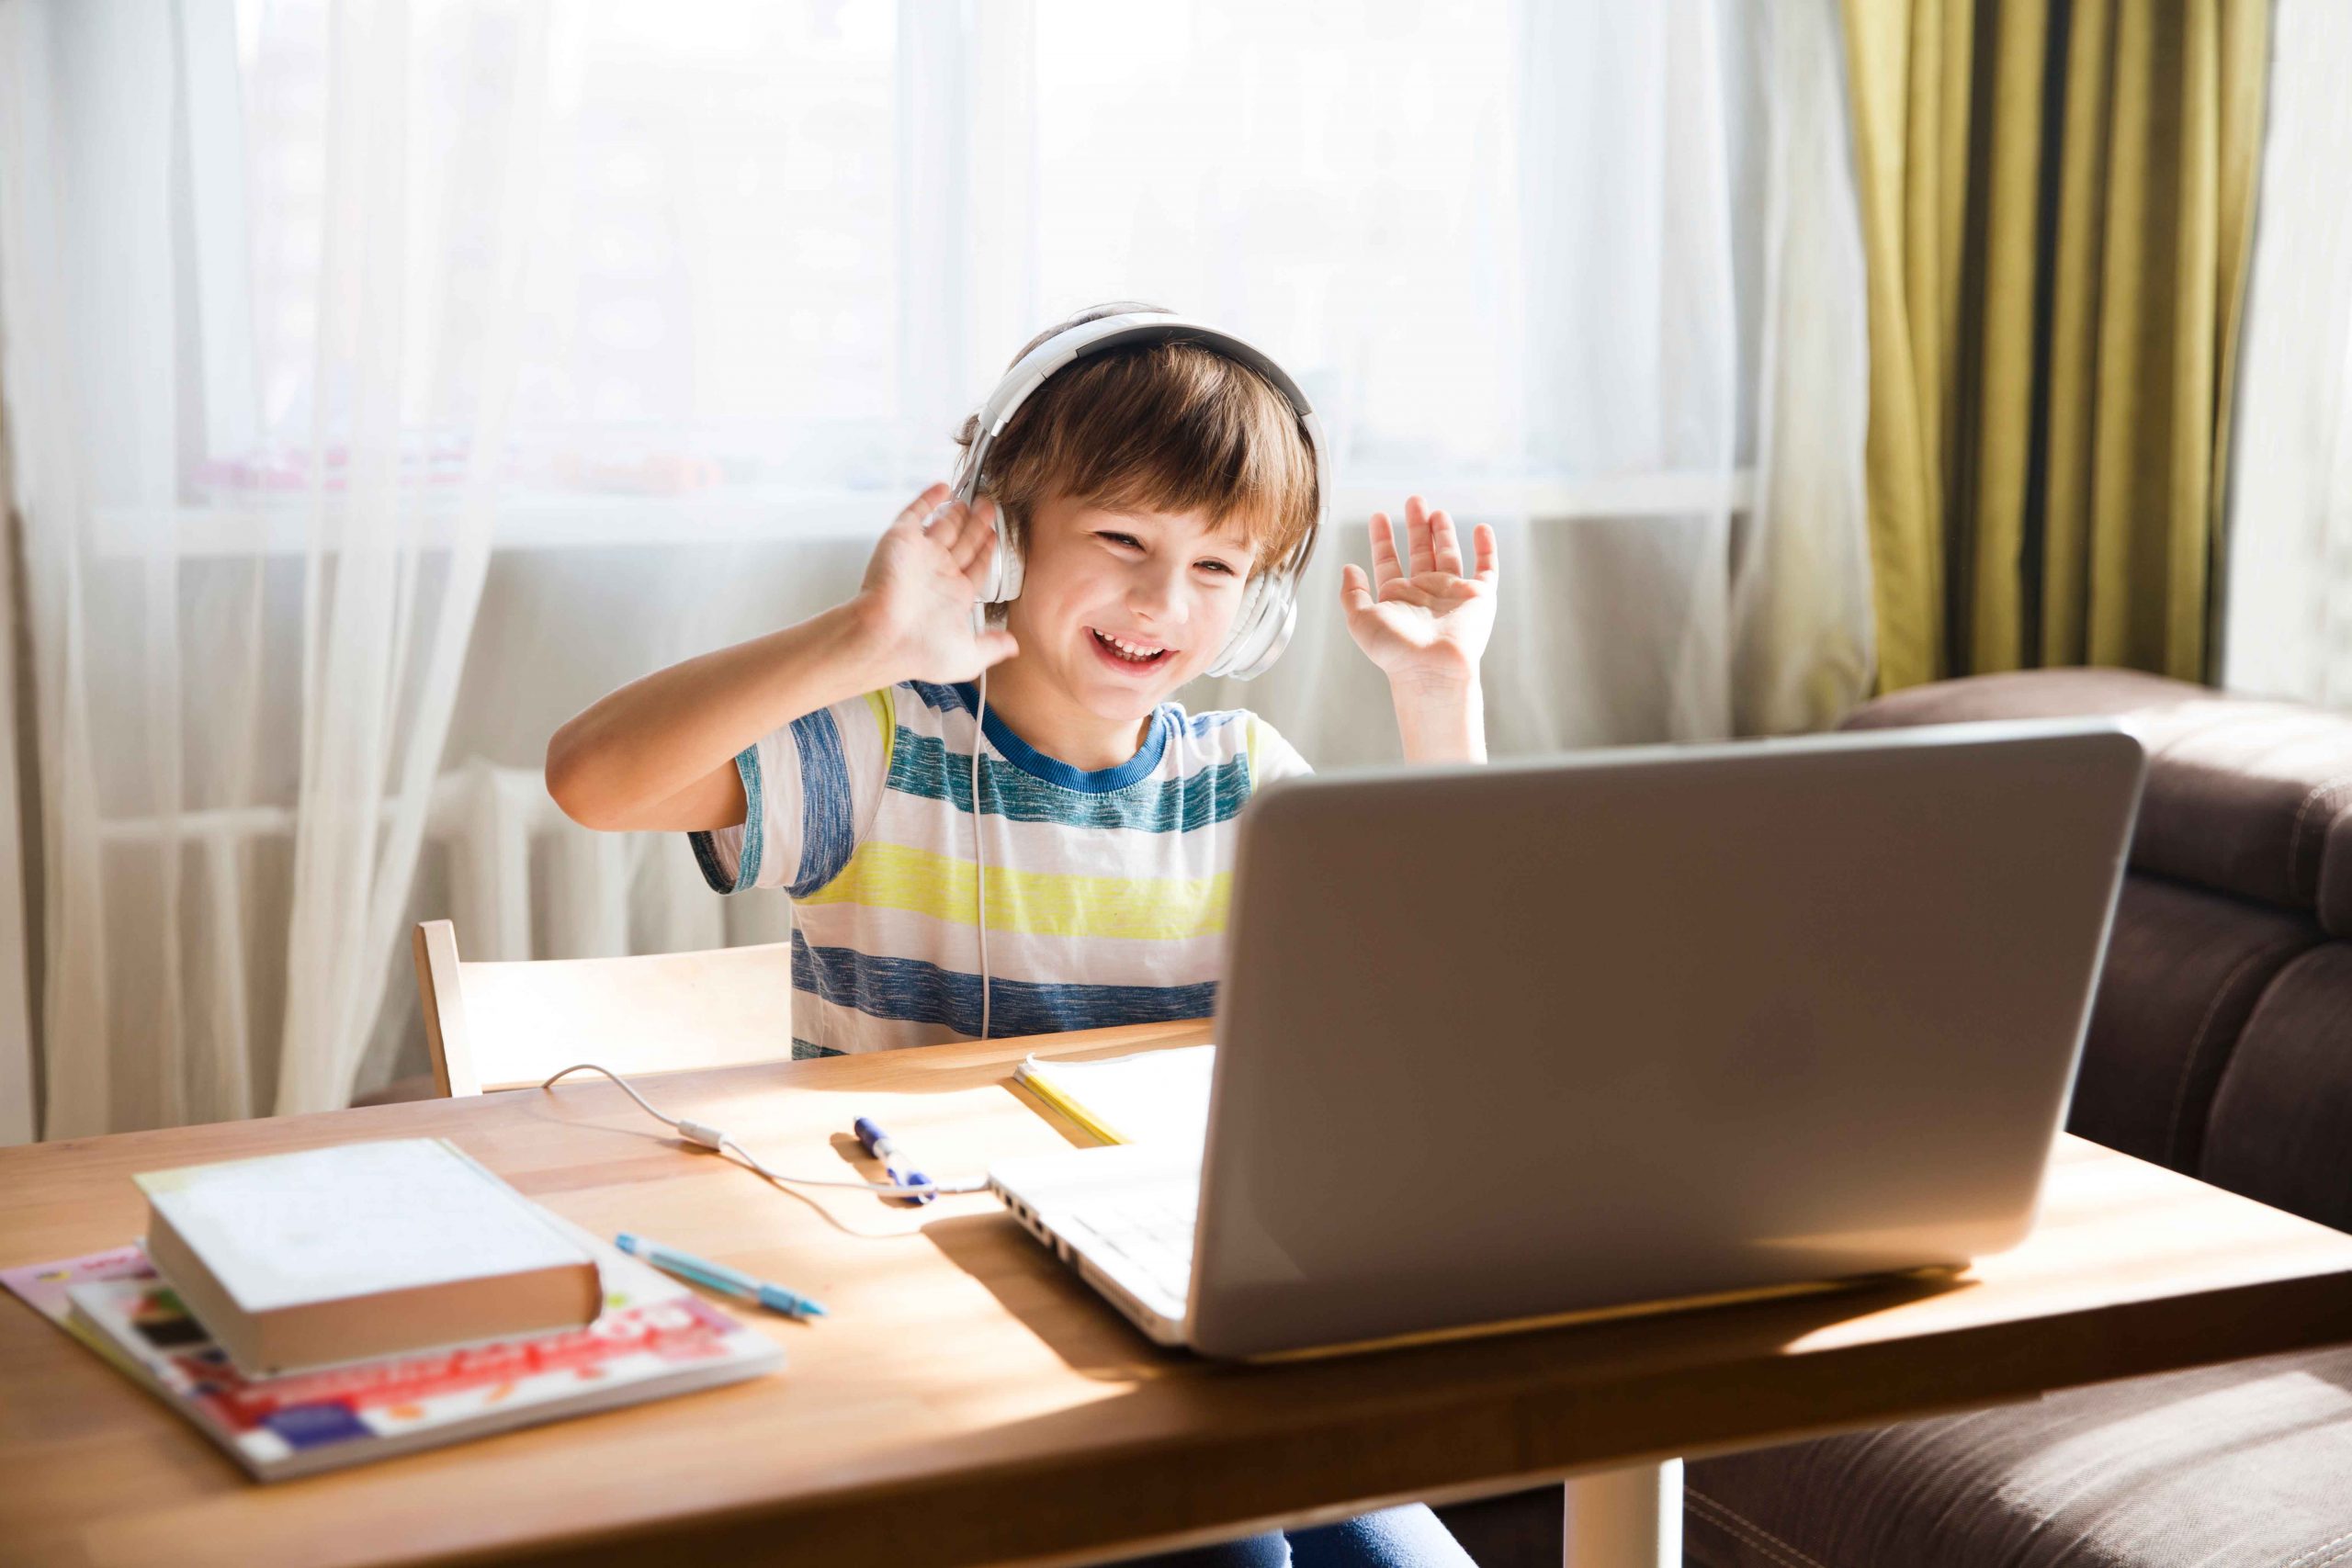 Child,Boy,In,Headphones,Is,Using,A,Laptop,And,Study